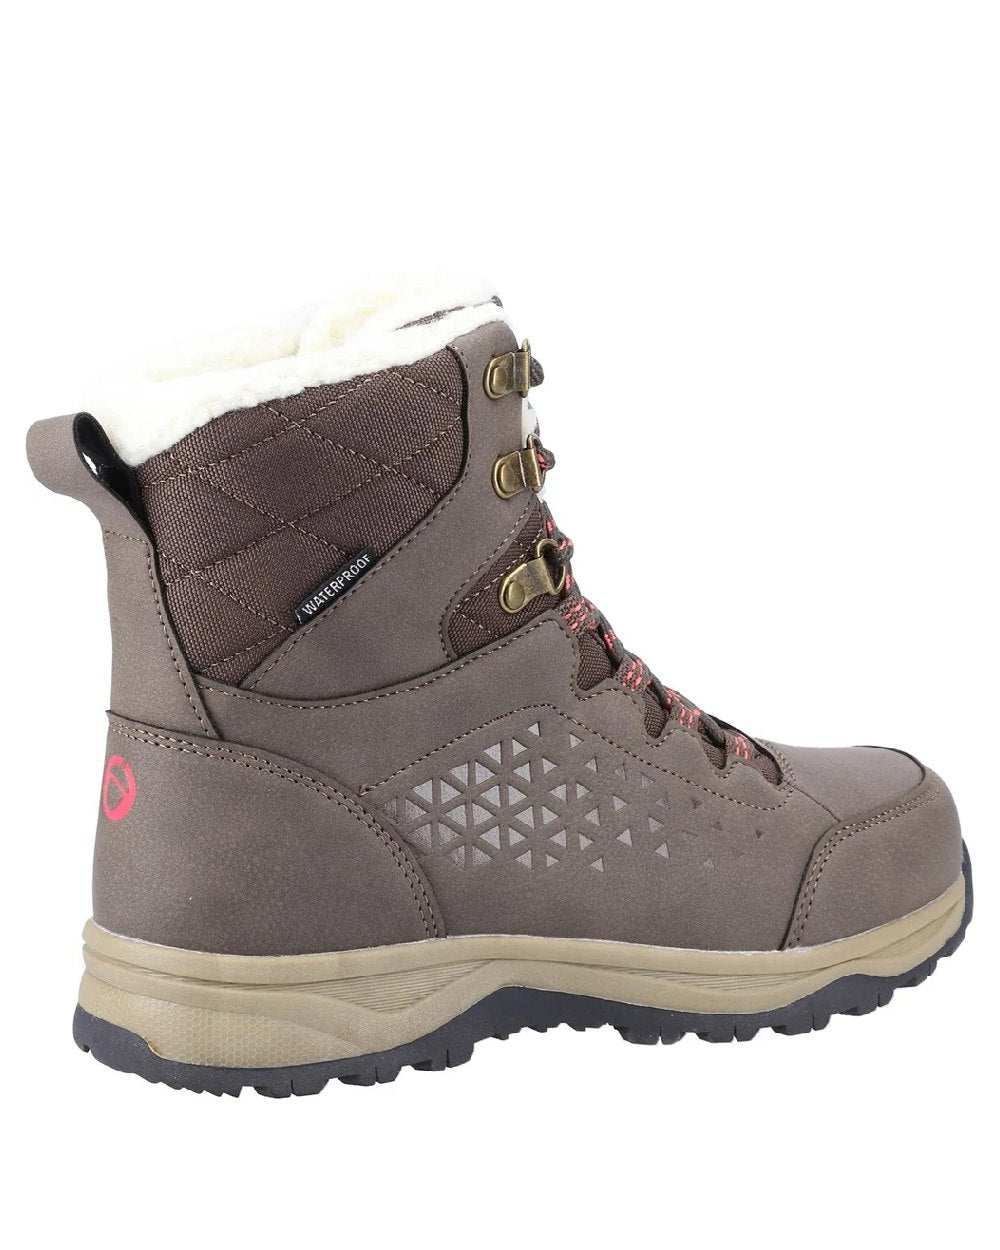 Taupe coloured Cotswold Burton Hiking Boots on white background 